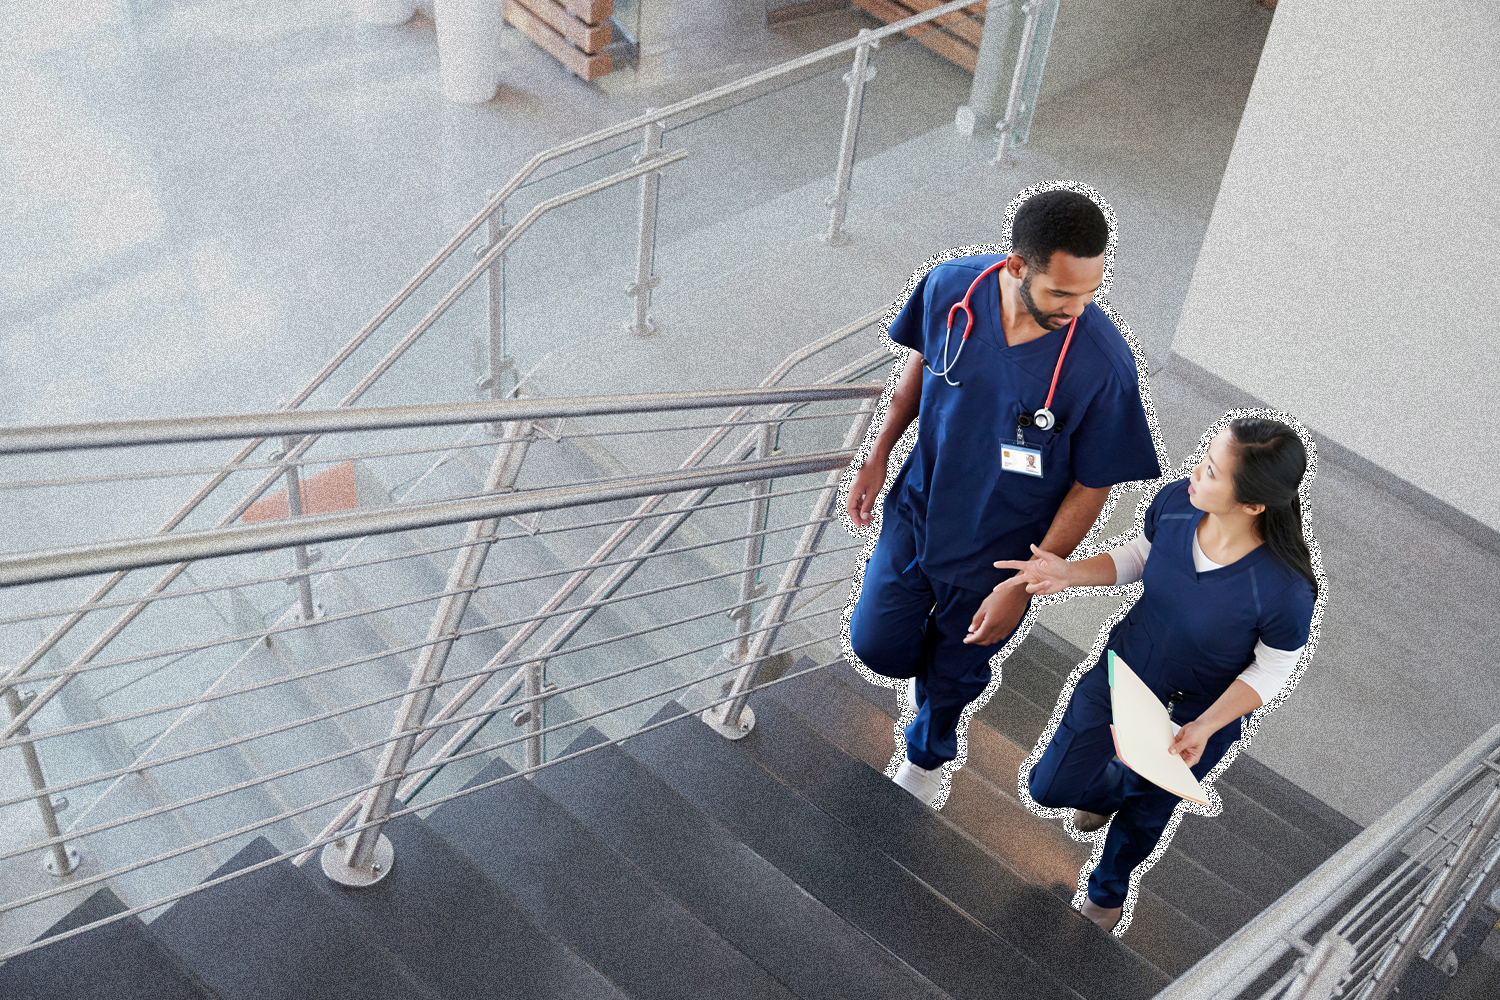 Two healthcare professionals walk up the stairs